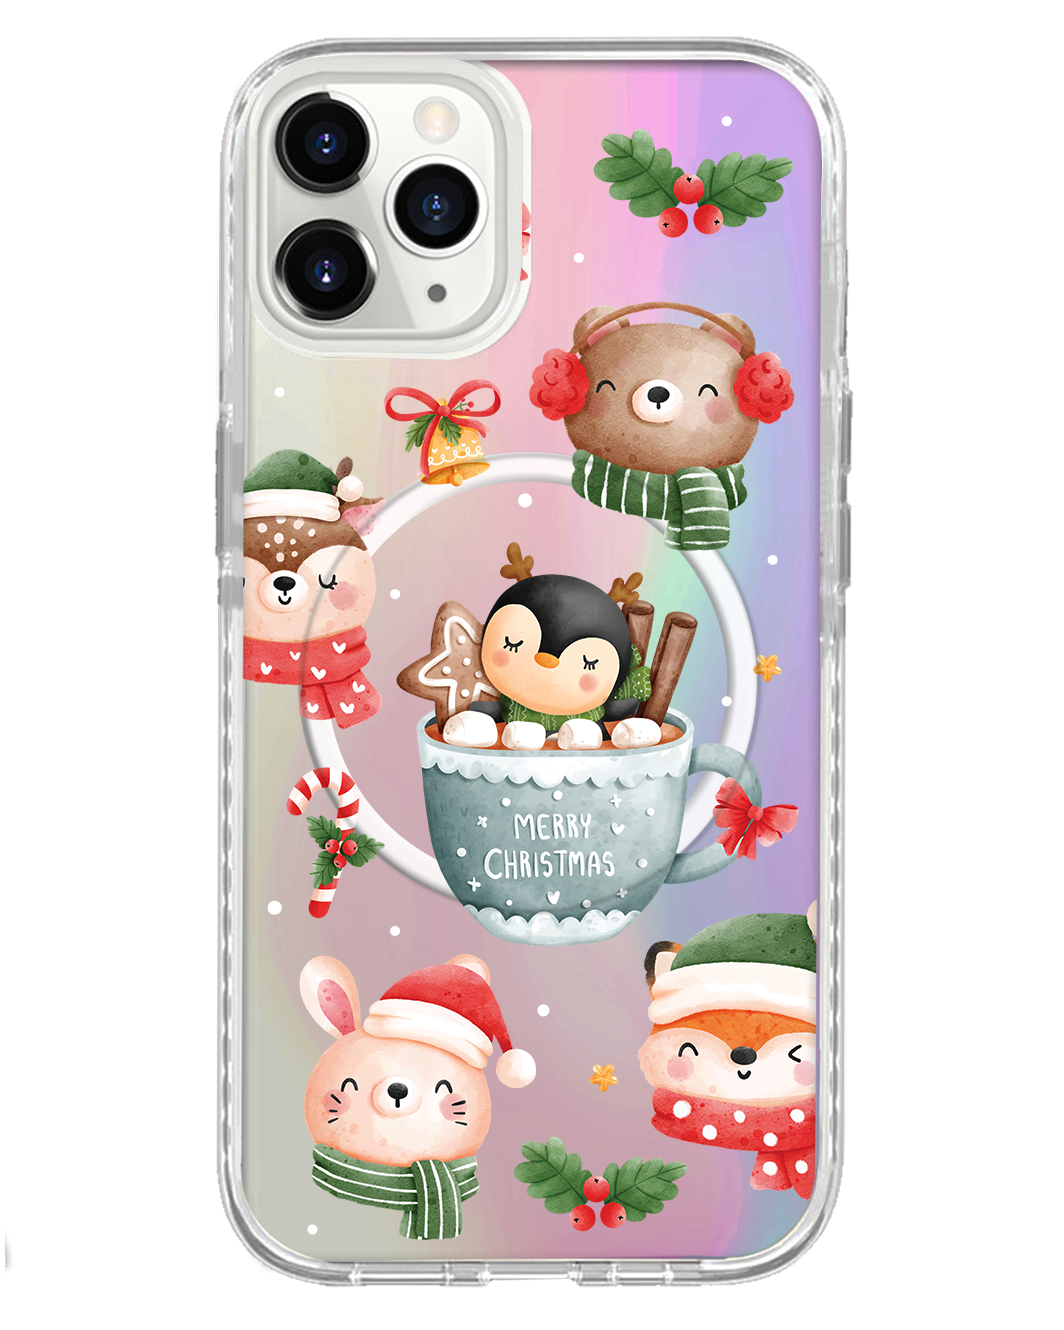 iPhone Rearguard Holo - Storybook Christmas 2.0